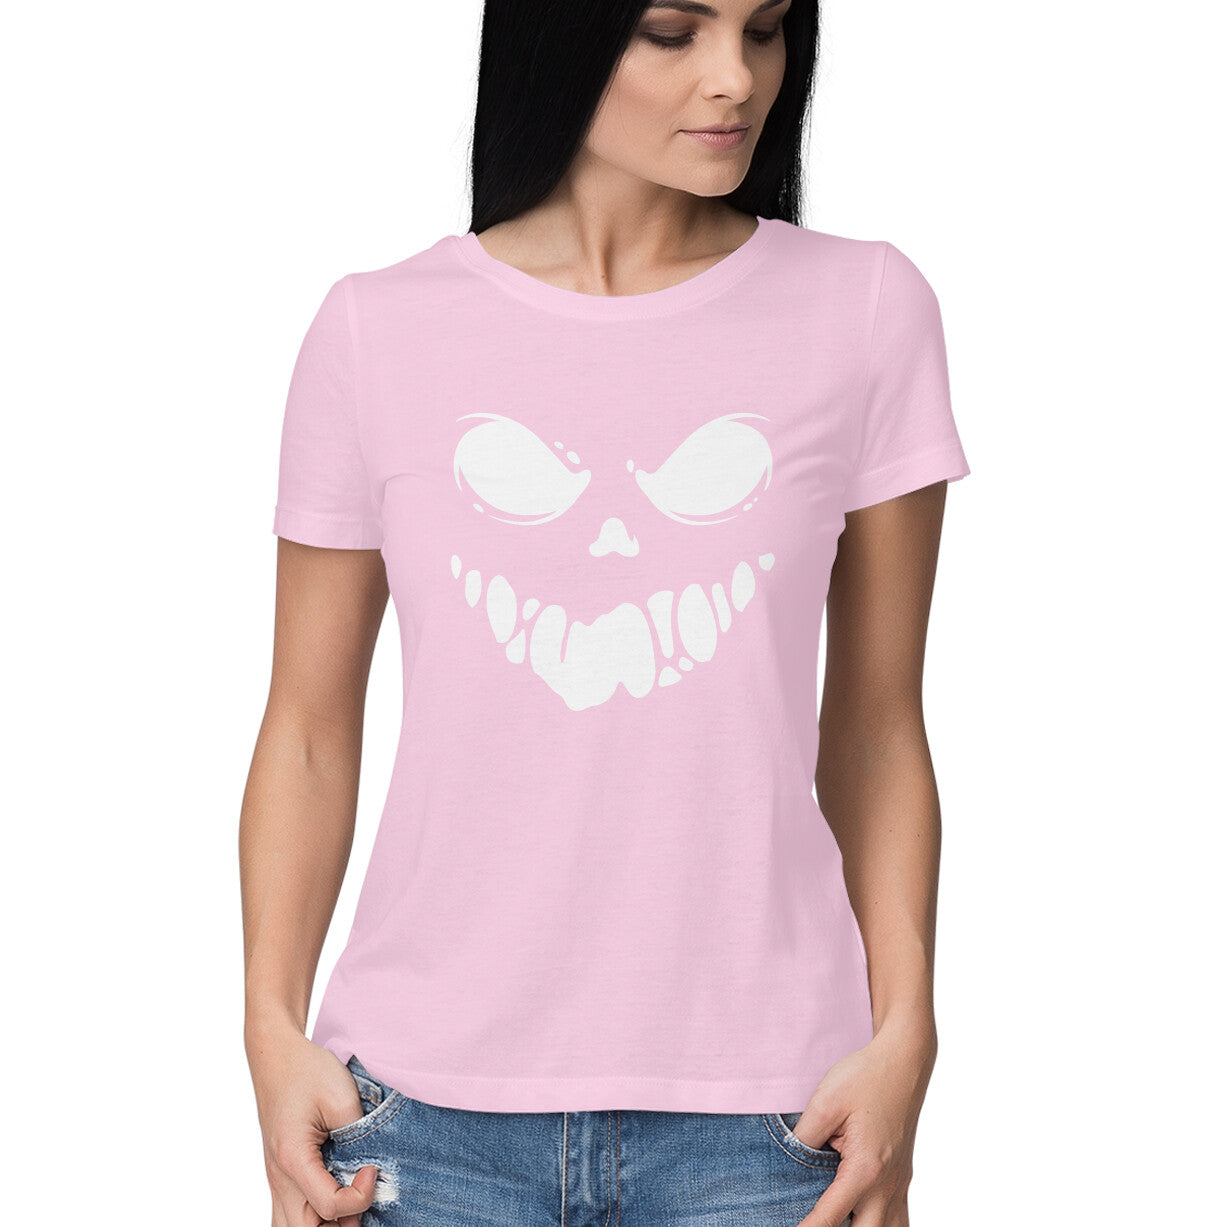 Black Spooky Scary Ghost Face Women's Half Sleeve Round Neck T-Shirt